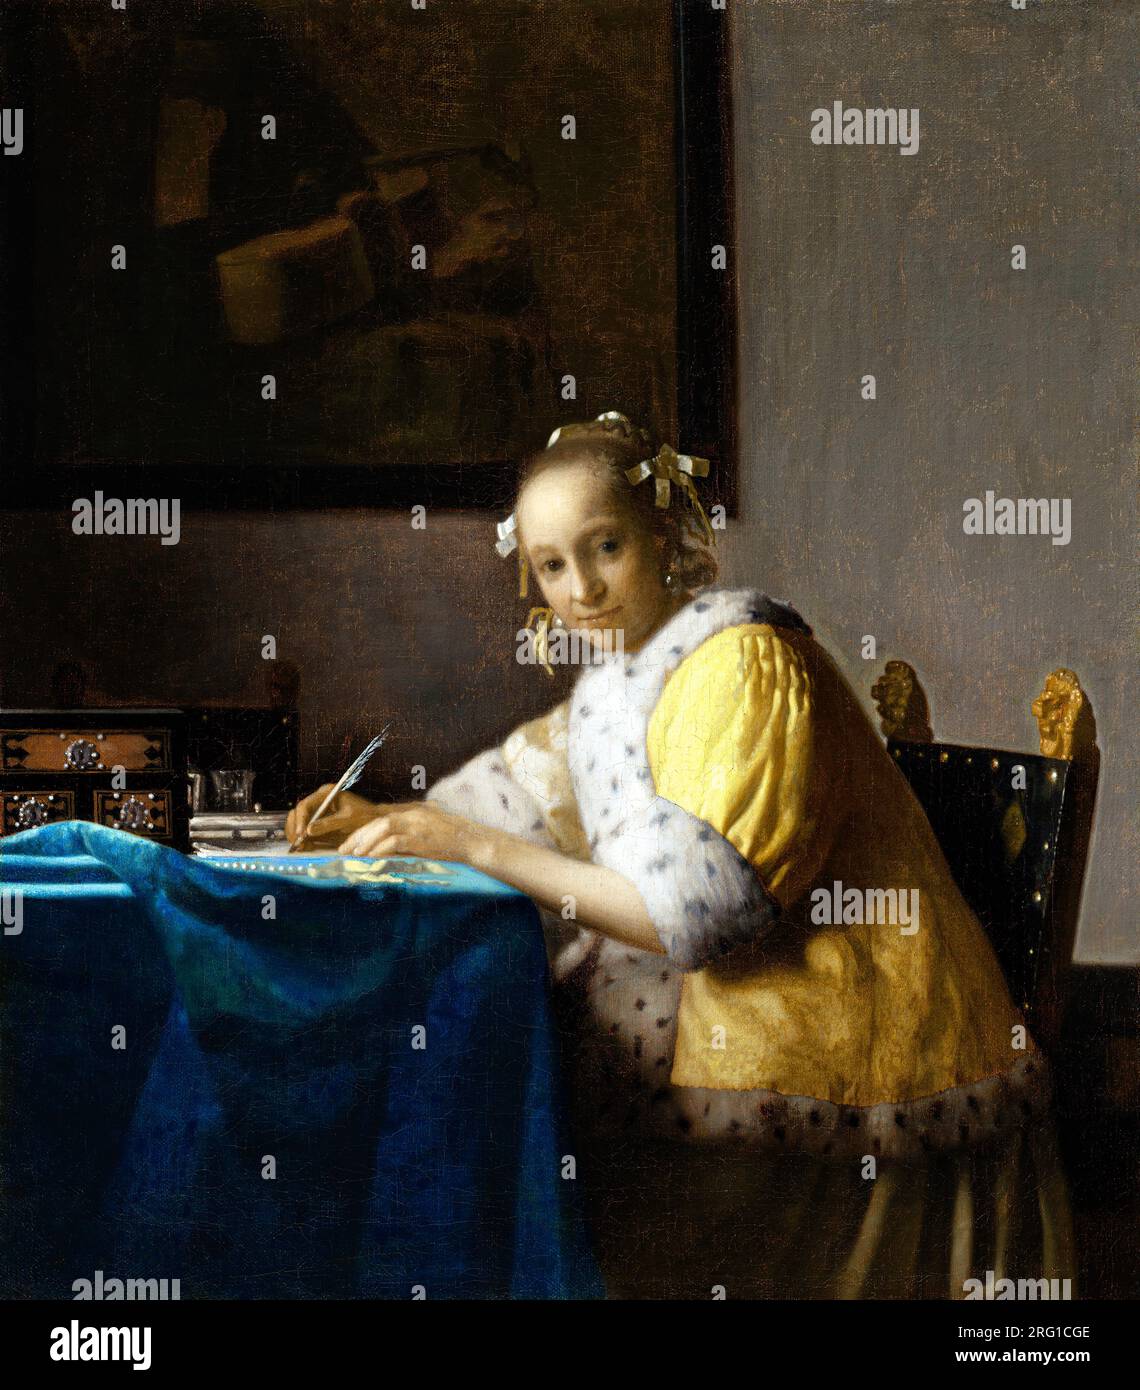 A Lady Writing a Letter by Johannes Vermeer. Original from the National Gallery of Art. Stock Photo